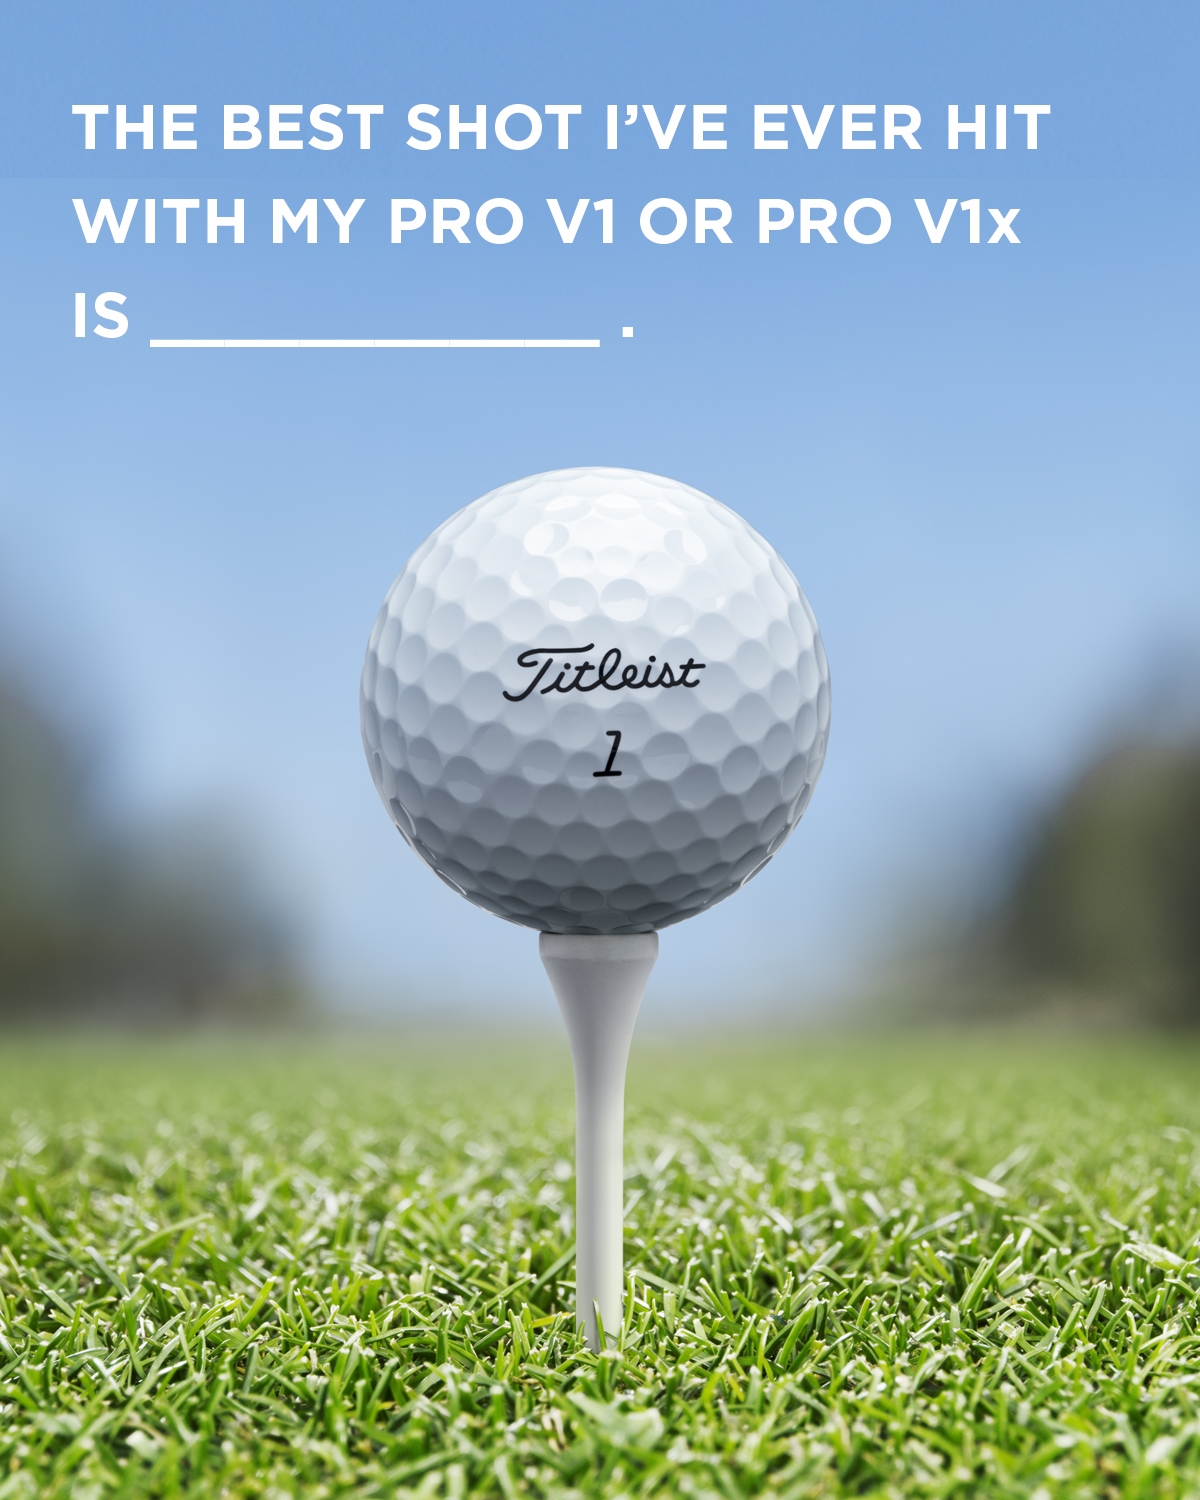 Image of a Pro V1 golf ball on a tee